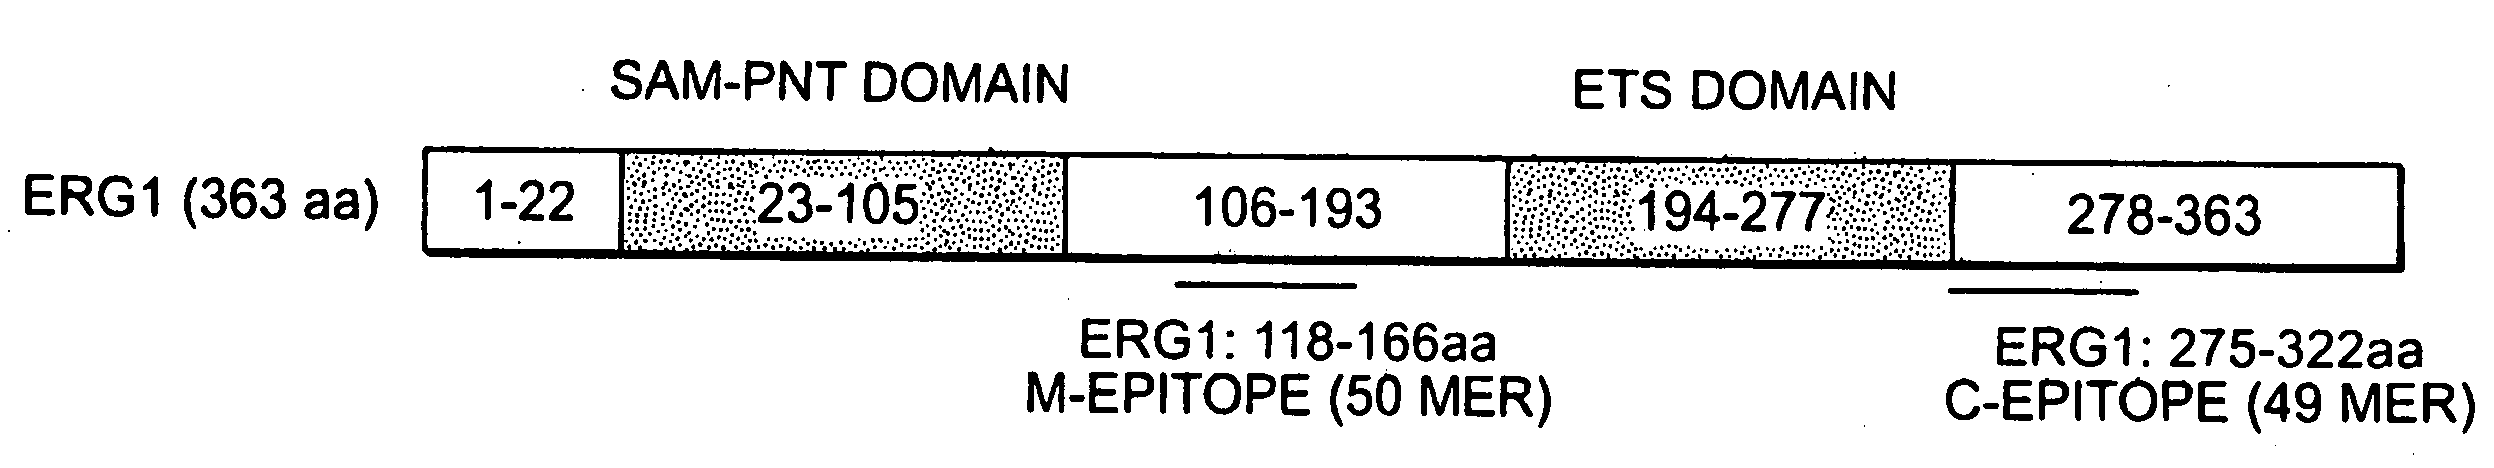 Methods of diagnosing or treating prostate cancer using the erg gene, alone or in combination with other over or under expressed genes in prostate cancer